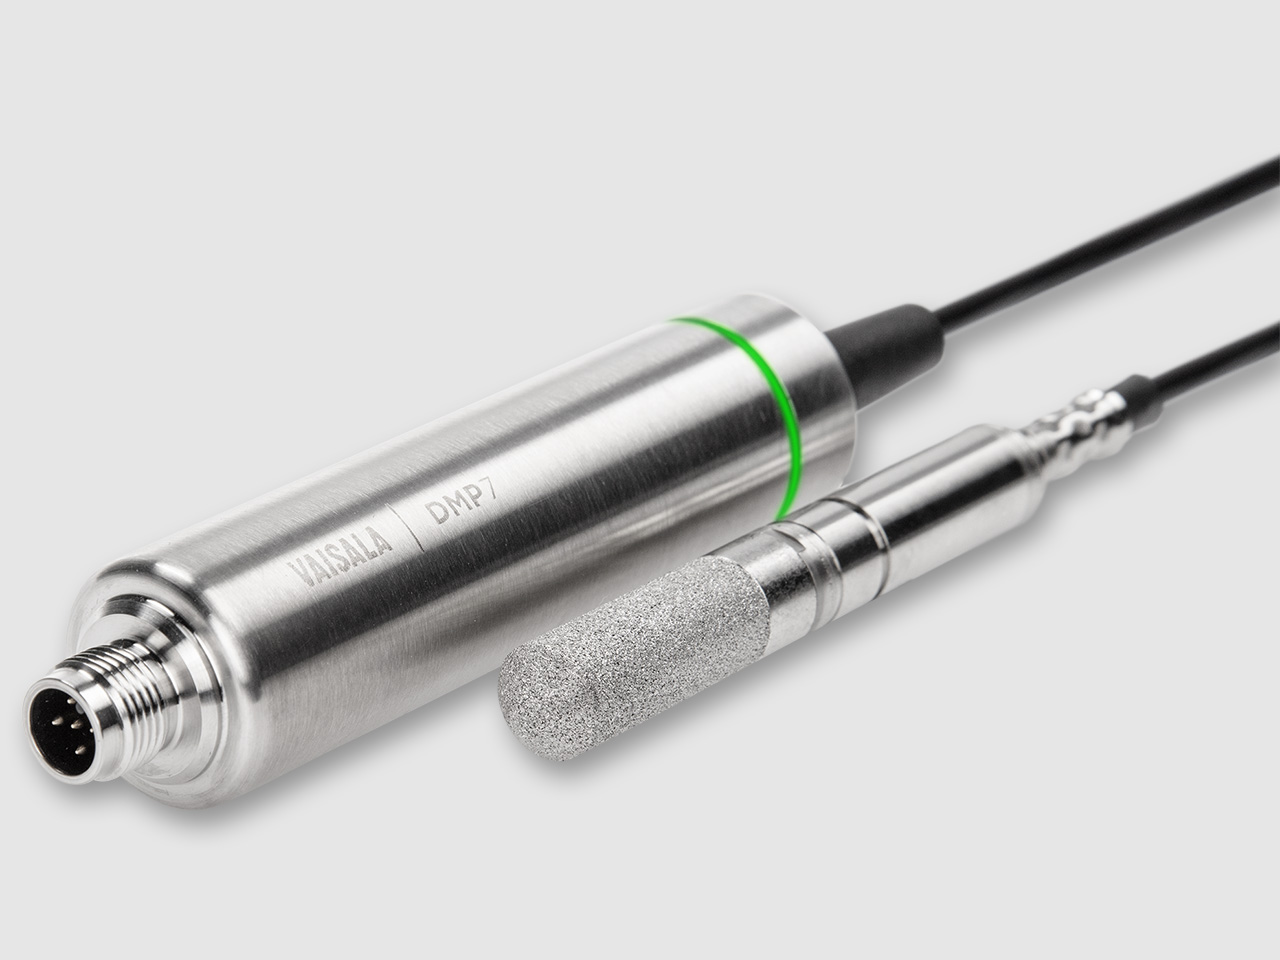 Vaisala DRYCAP ® developed Point and Temperature Probe DMP7 is made for tight Spaces and low humidity applications.